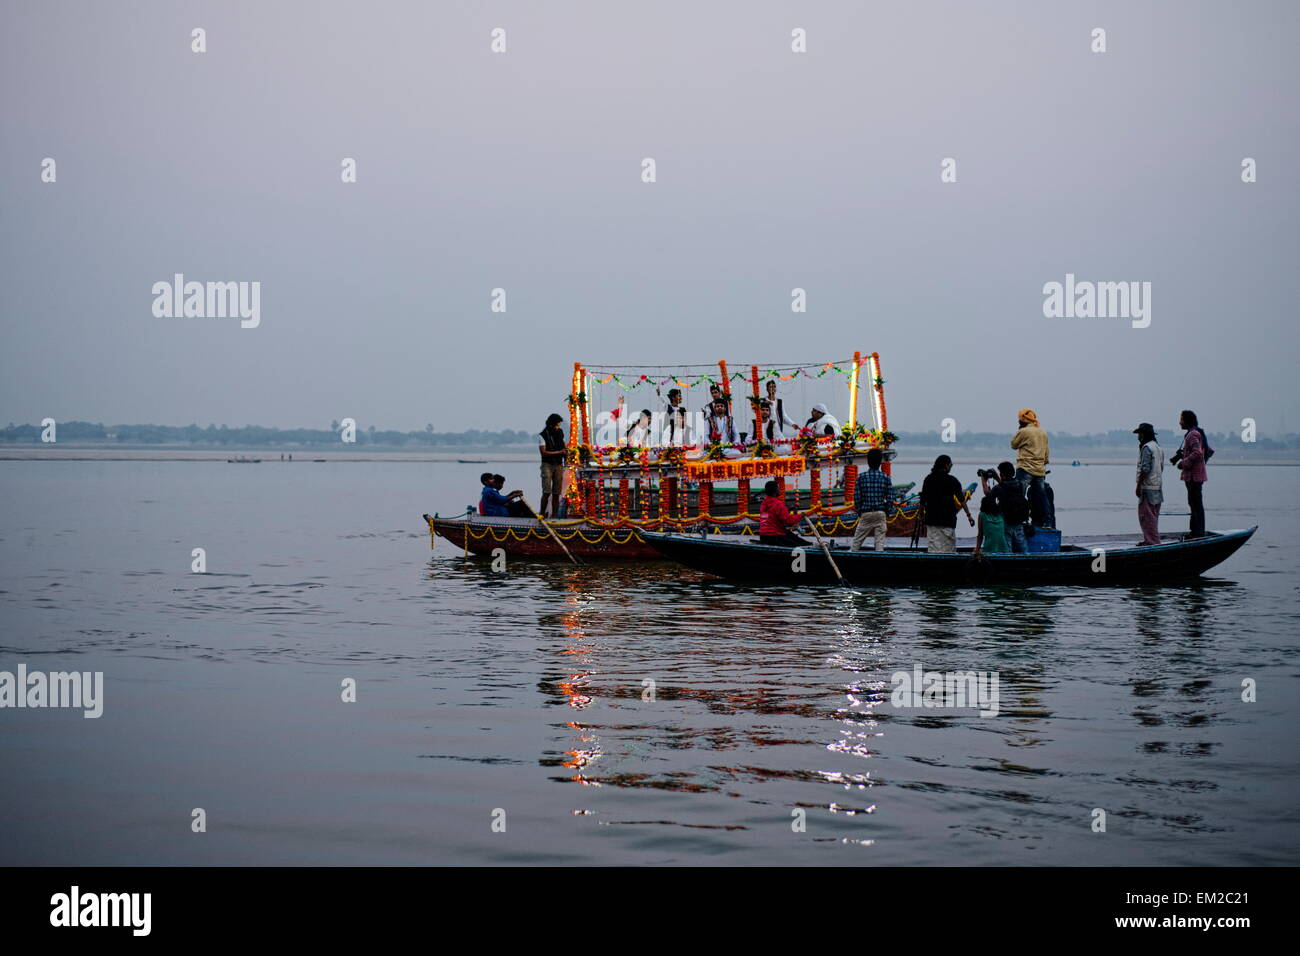 Music video being filmed in the Ganges Stock Photo